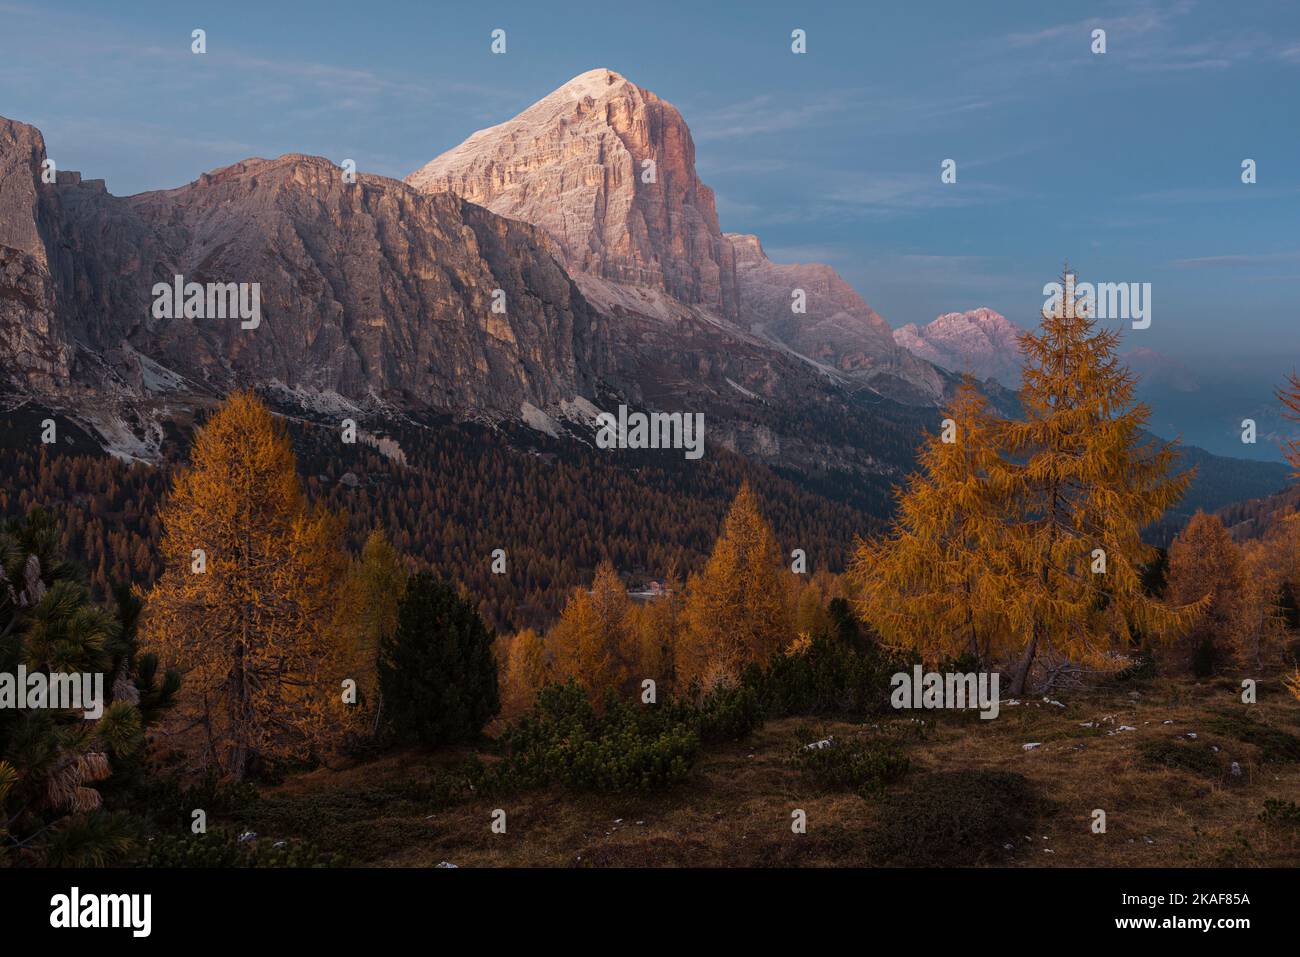 Alpenglow at the Tofane di Rozes above autumnal mountain forests at the Falzarego Pass in the evening sun, Dolomites, Italy Stock Photo